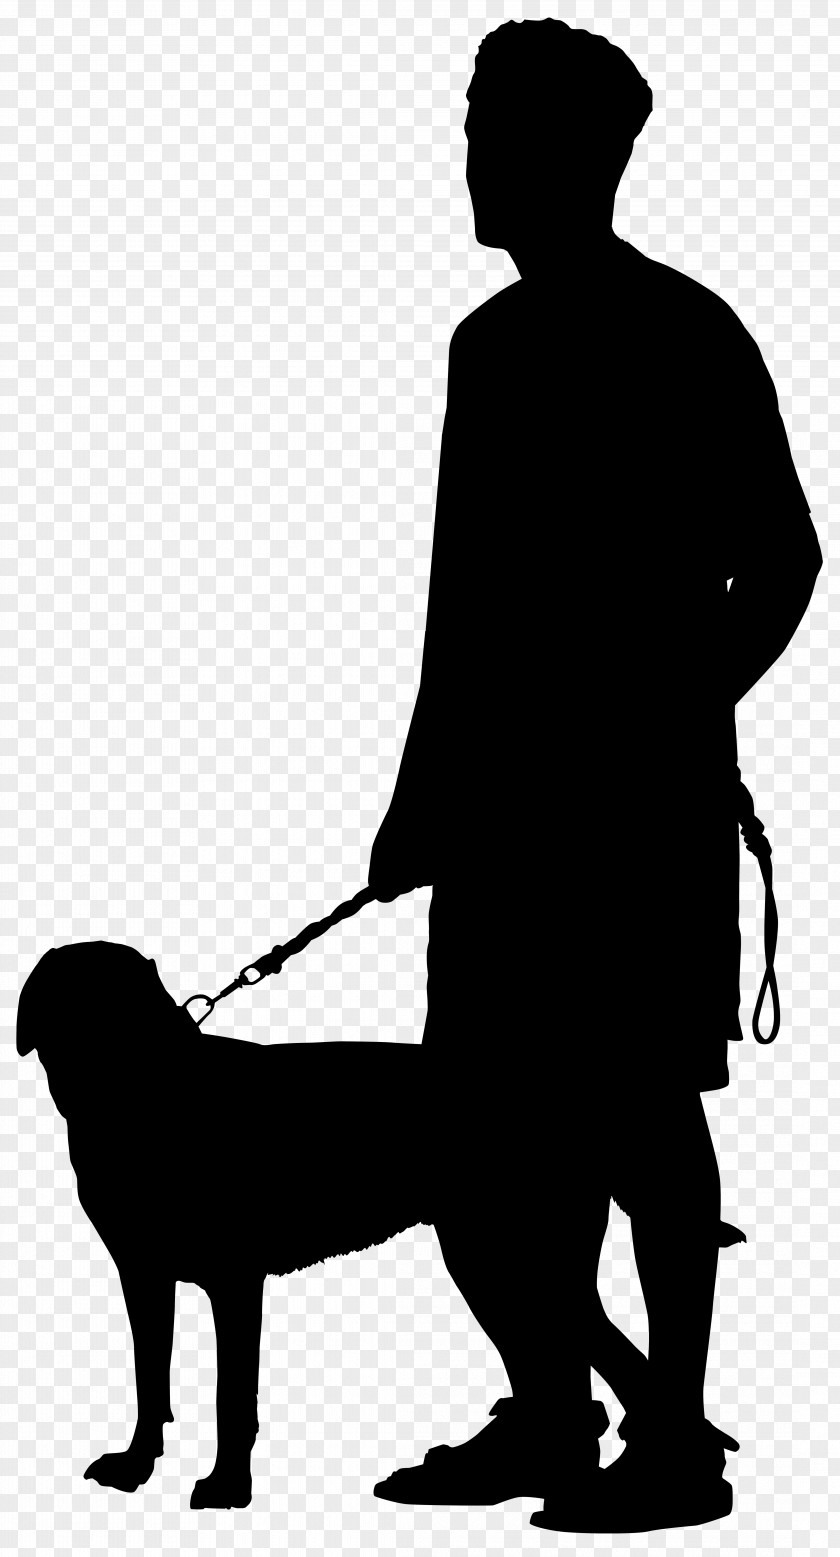 Man With Dog Silhouette Transparent Clip Art Image Walking PNG